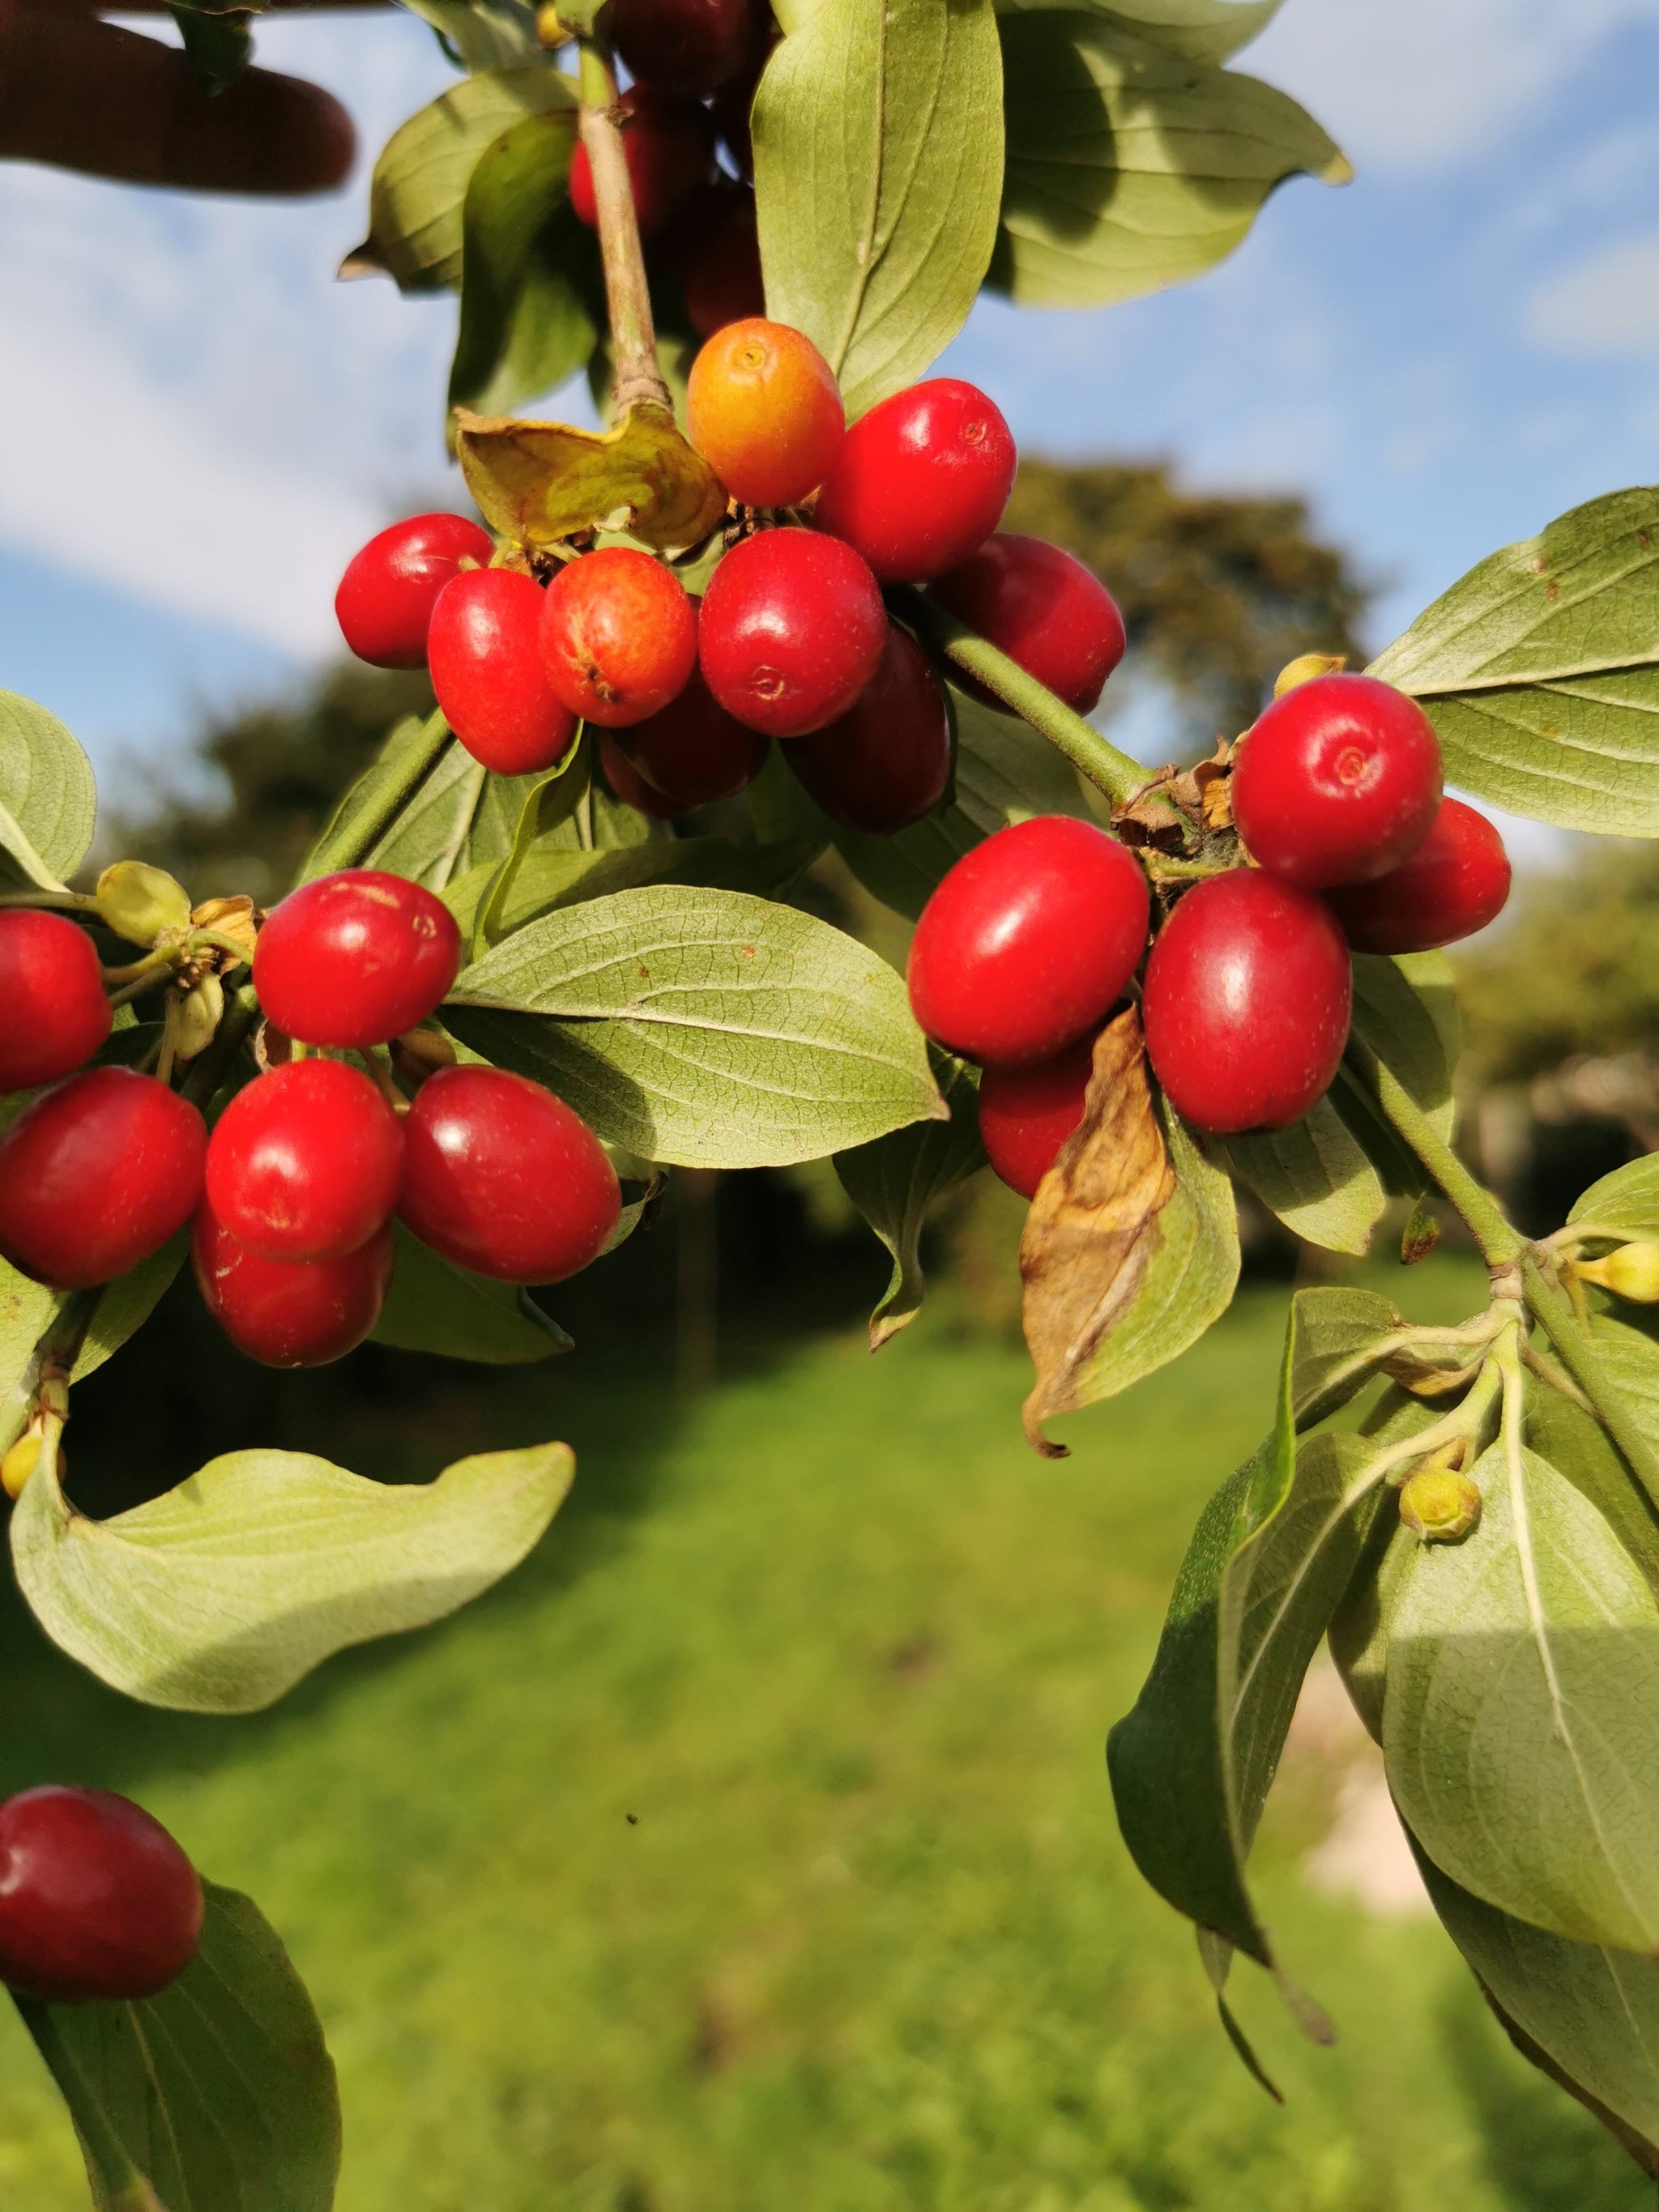 What Dogwood Tree Has Red Berries?